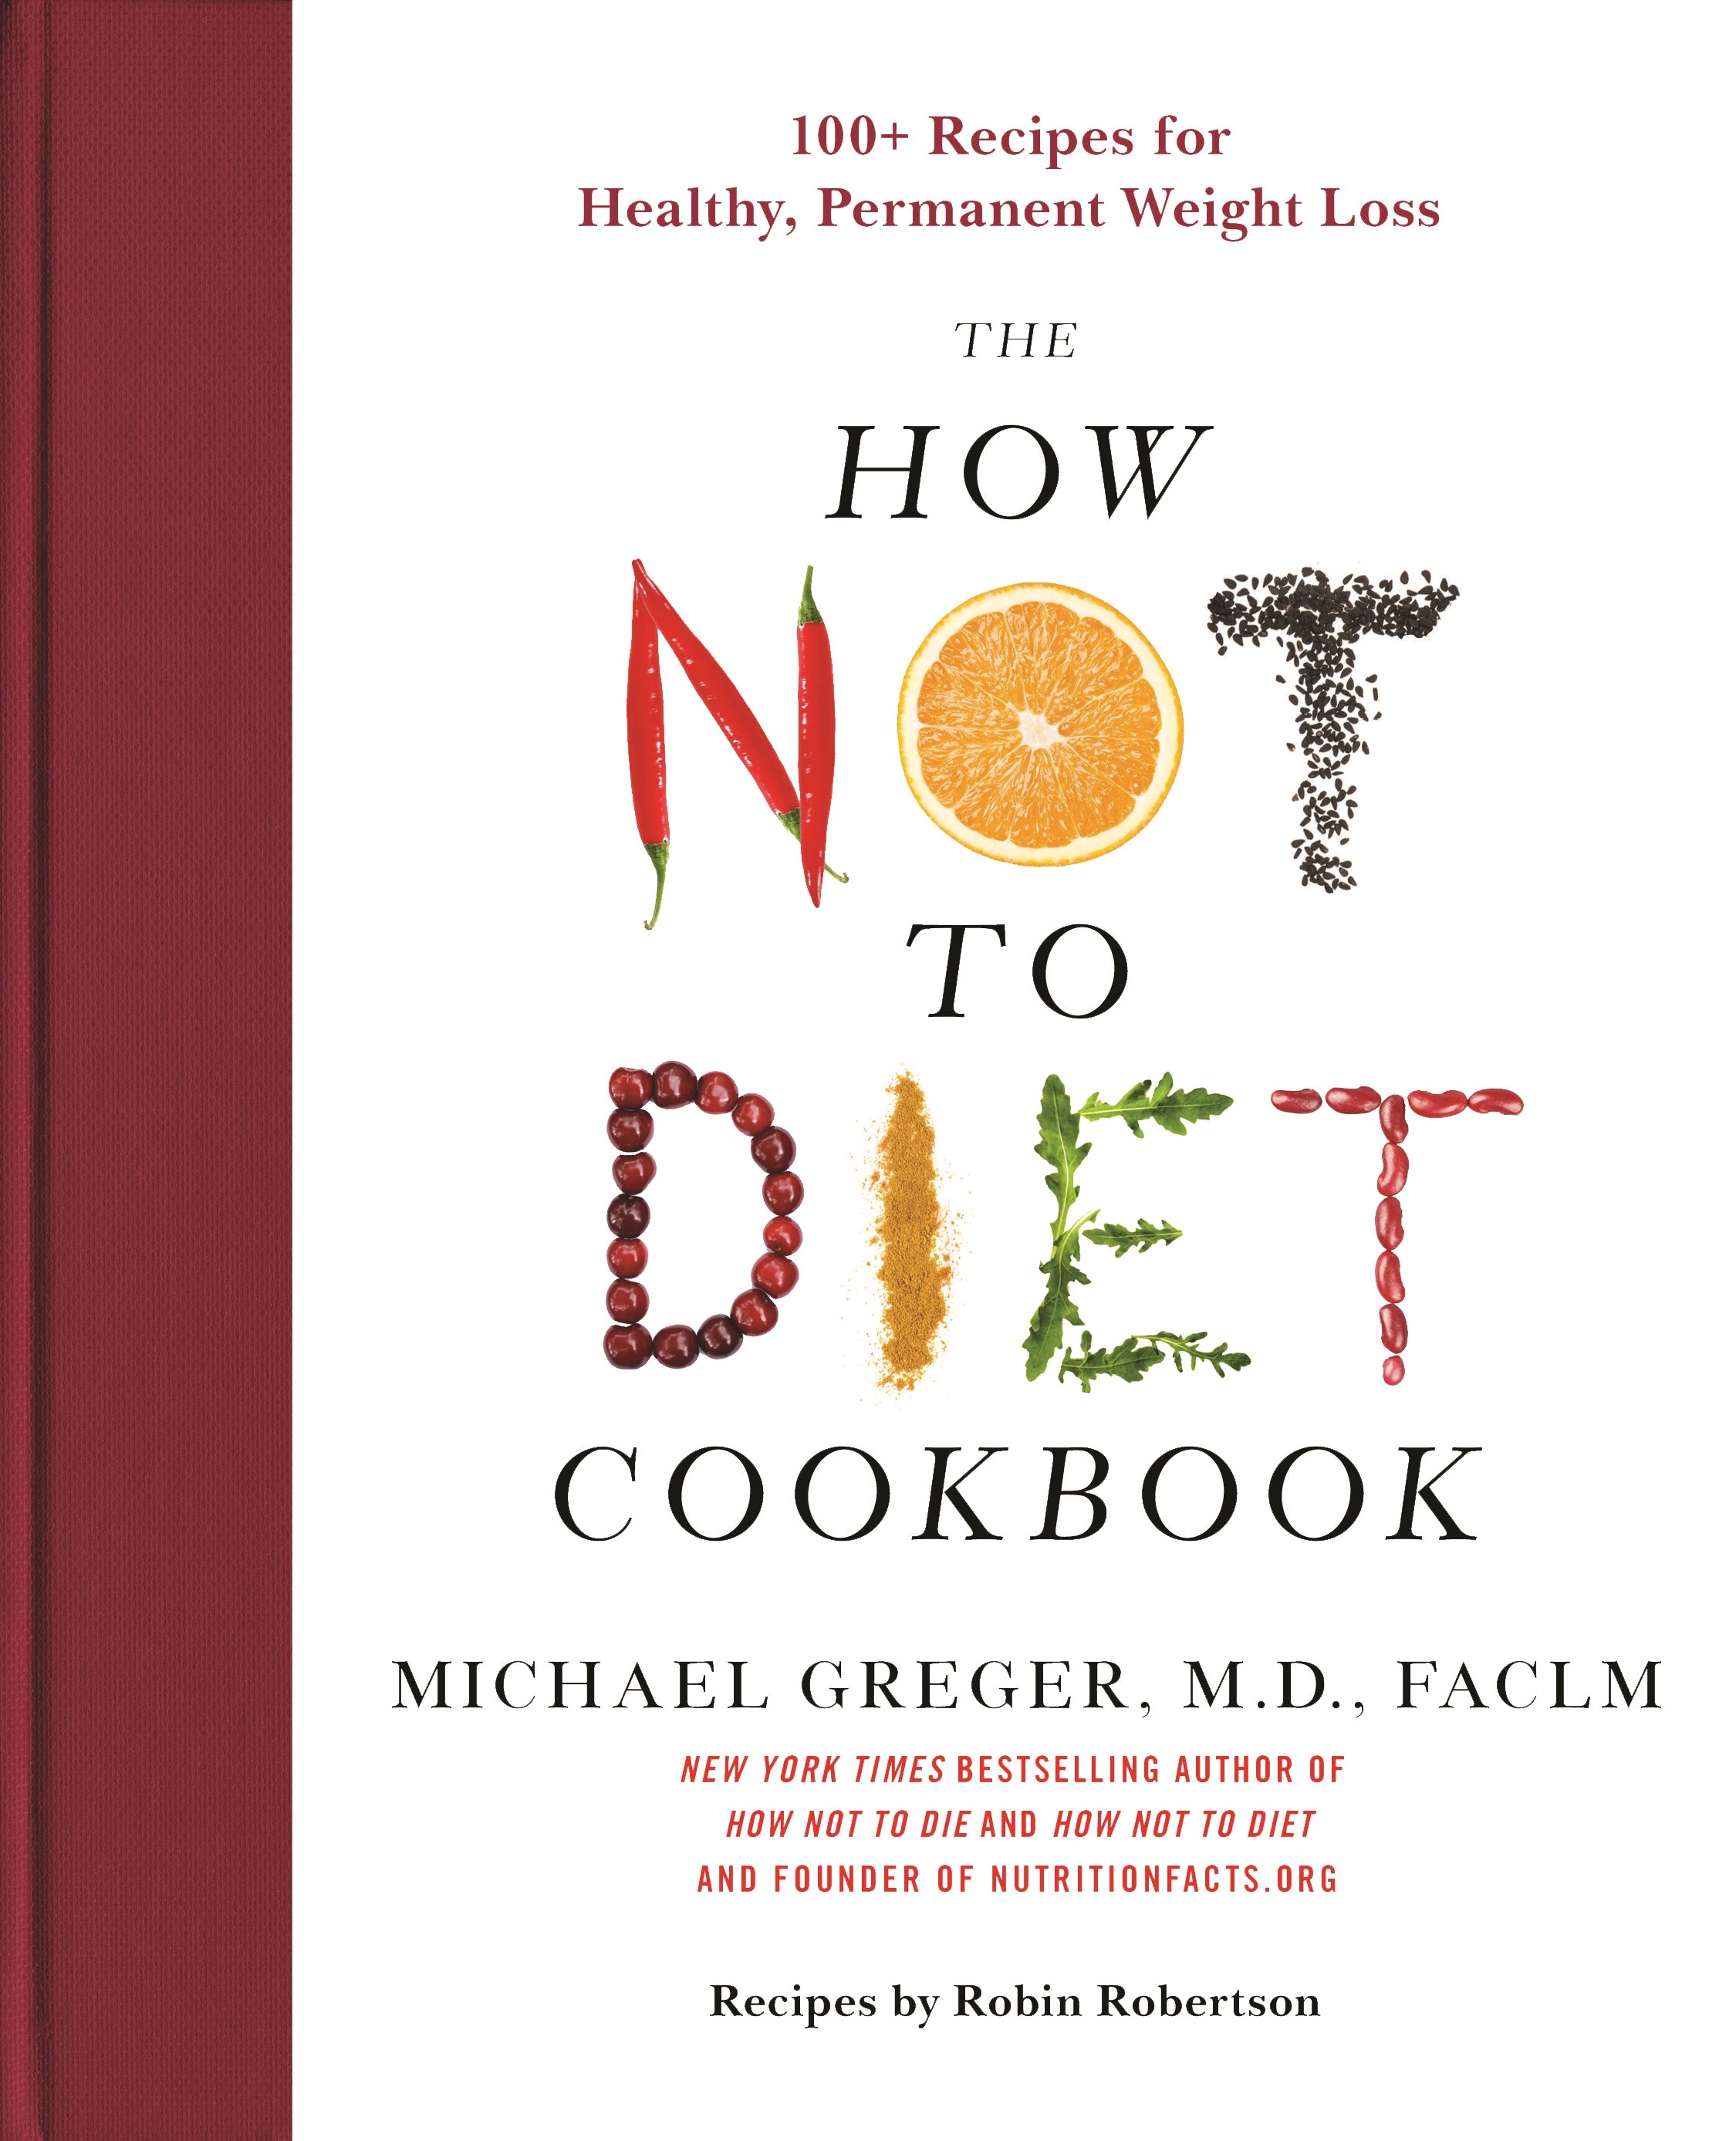 Book “The How Not to Diet Cookbook” by Dr. Michael Greger — December 8, 2020